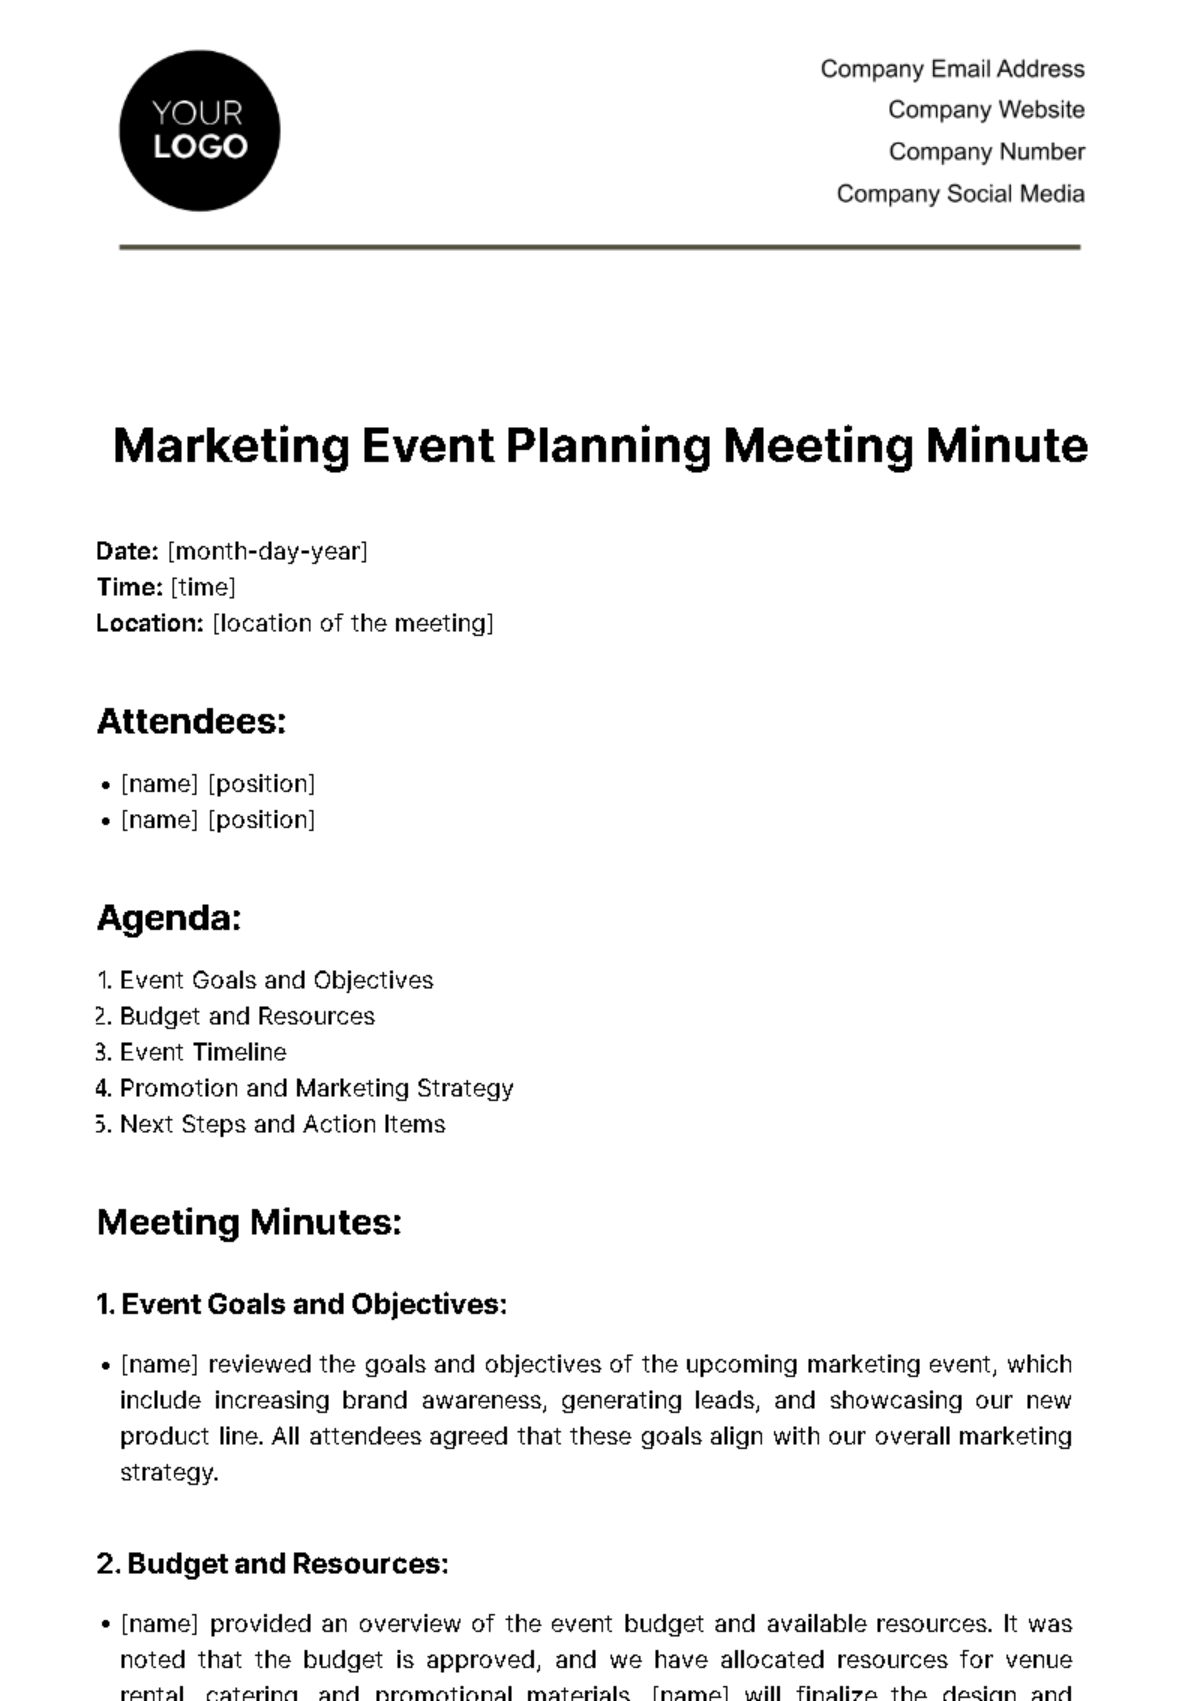 Free Marketing Event Planning Meeting Minute Template